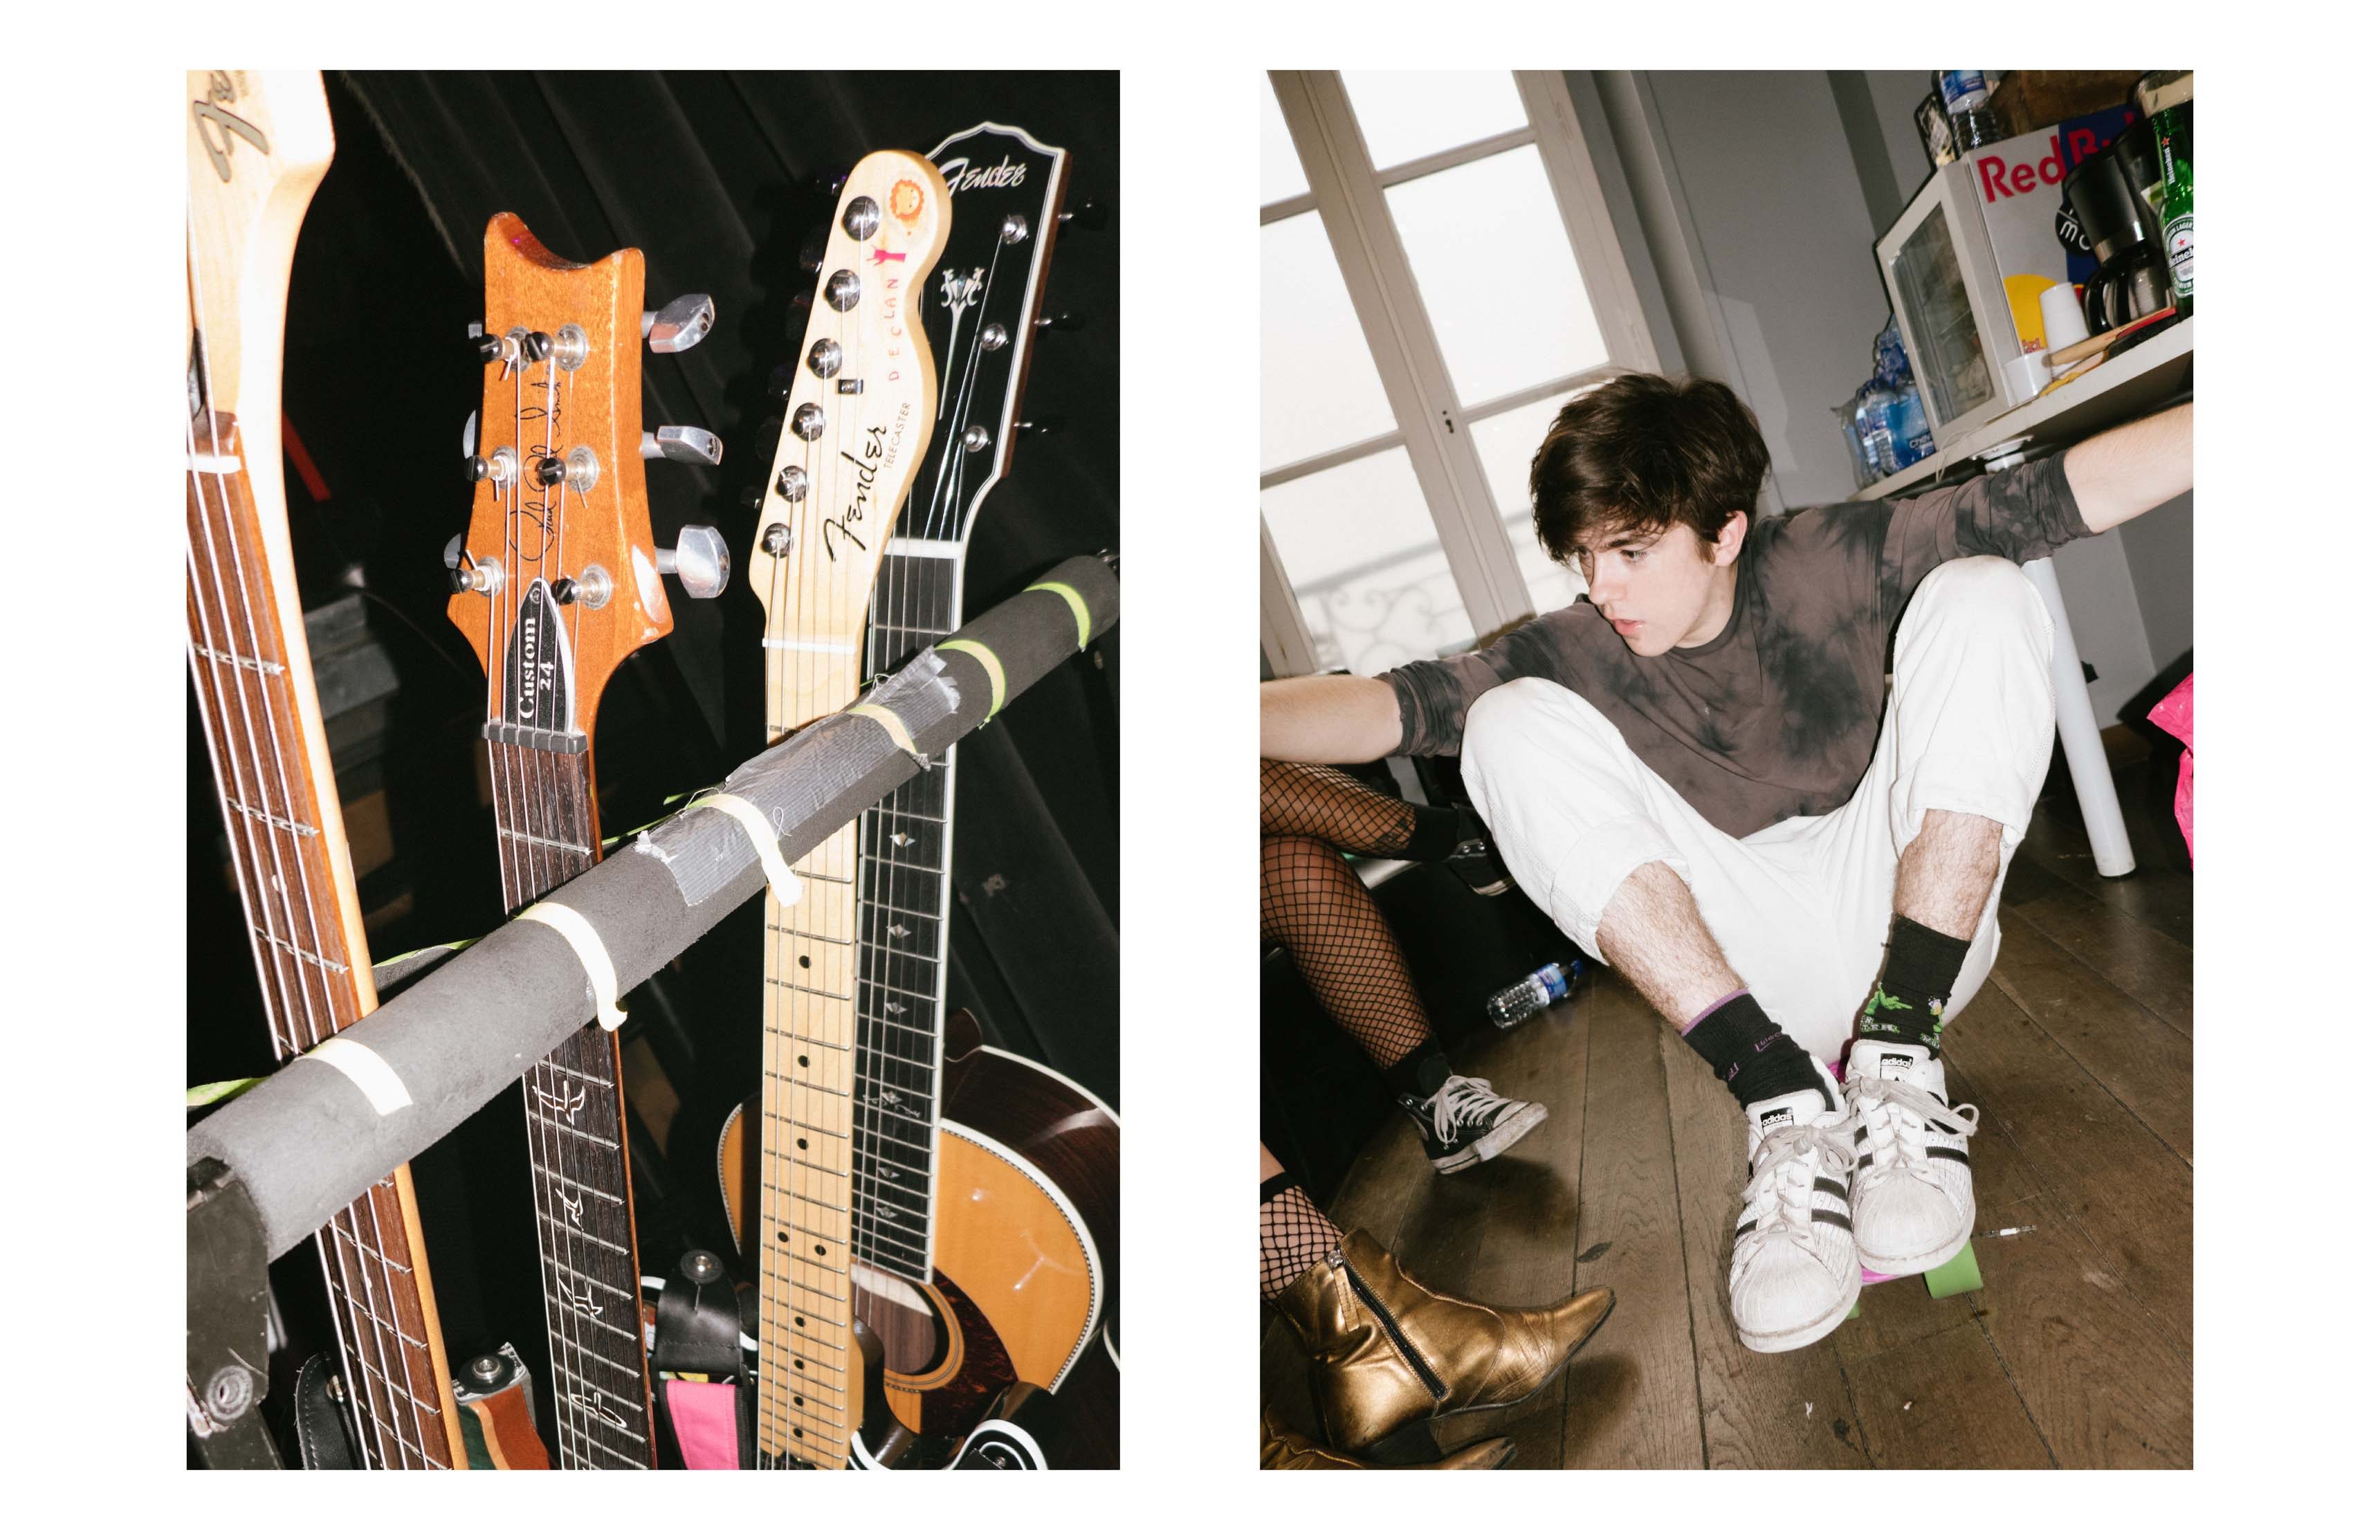 We spent a night with Declan McKenna, the 18-year old rock star